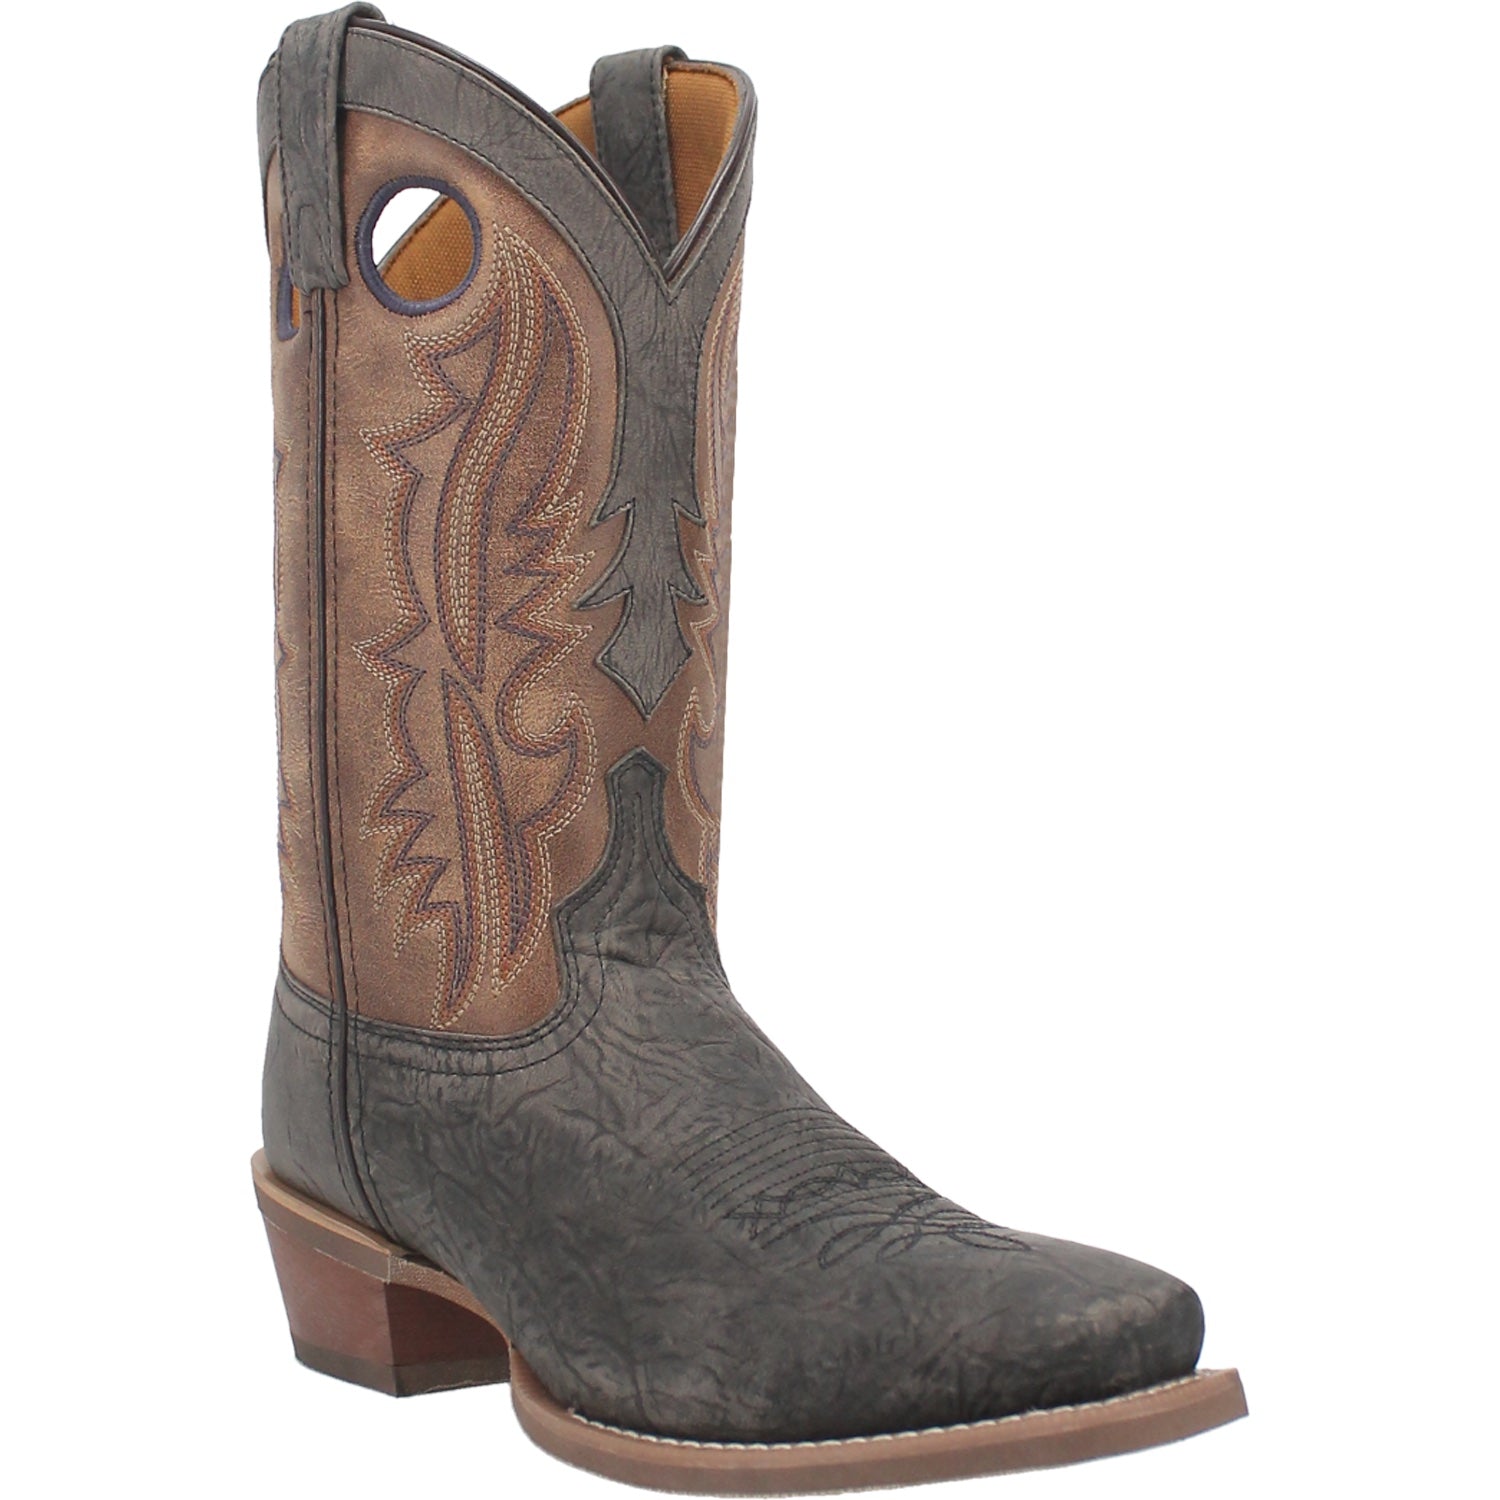 WALKER LEATHER BOOT Cover